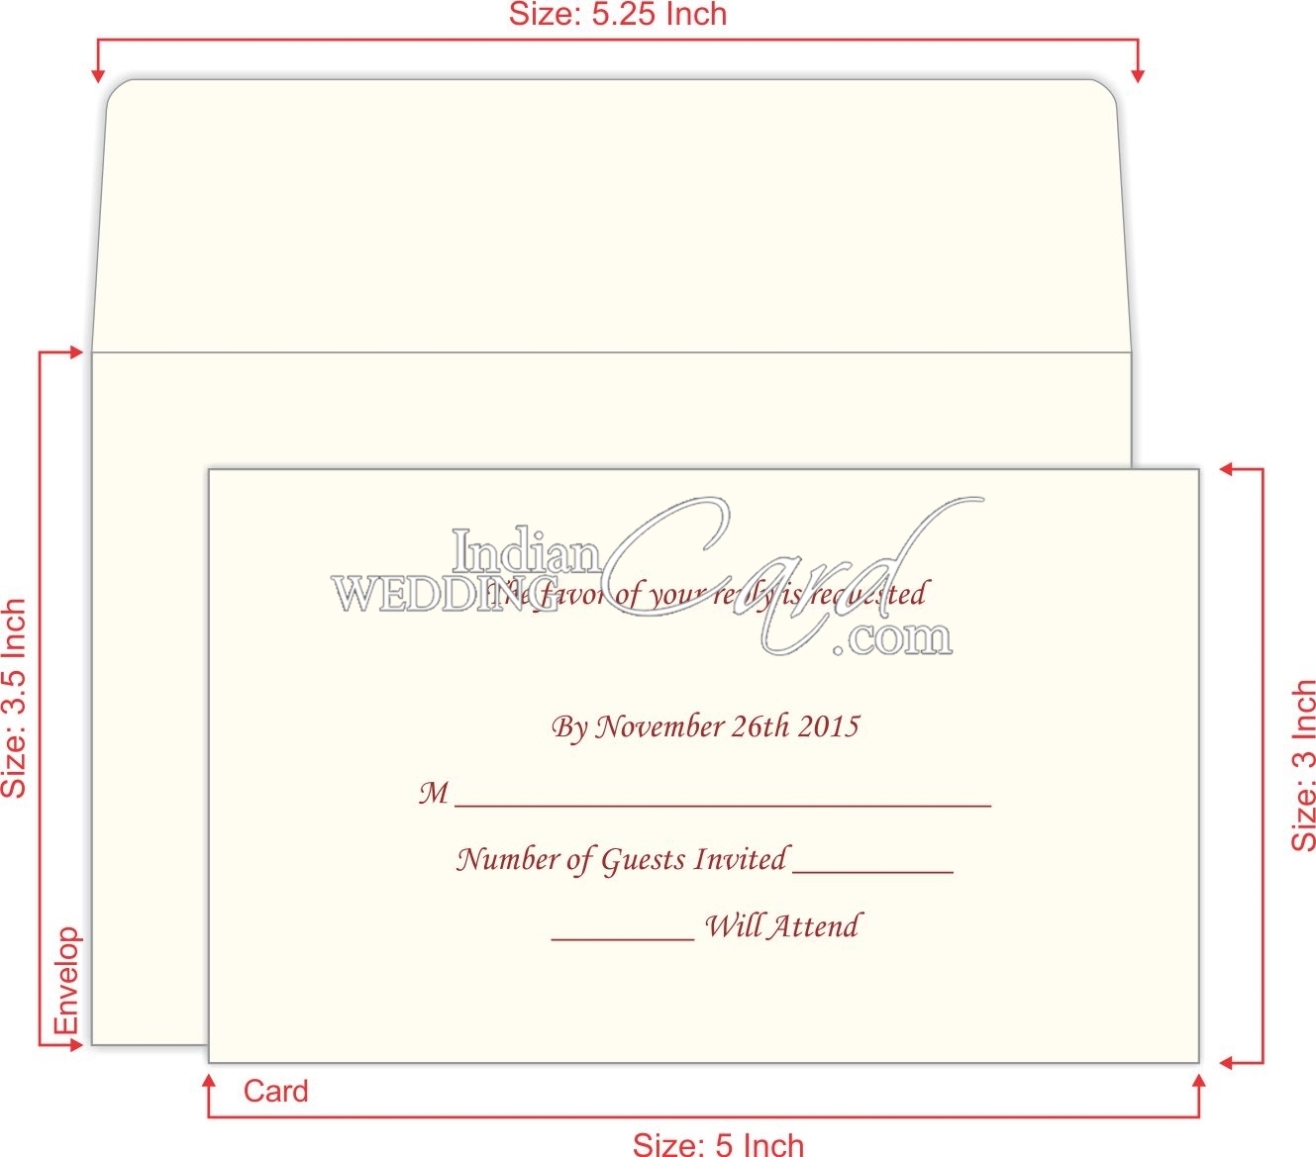 Rsvp Invitations Cards, Indian Wedding Card-Rsvp1 with Wedding Card Size Template